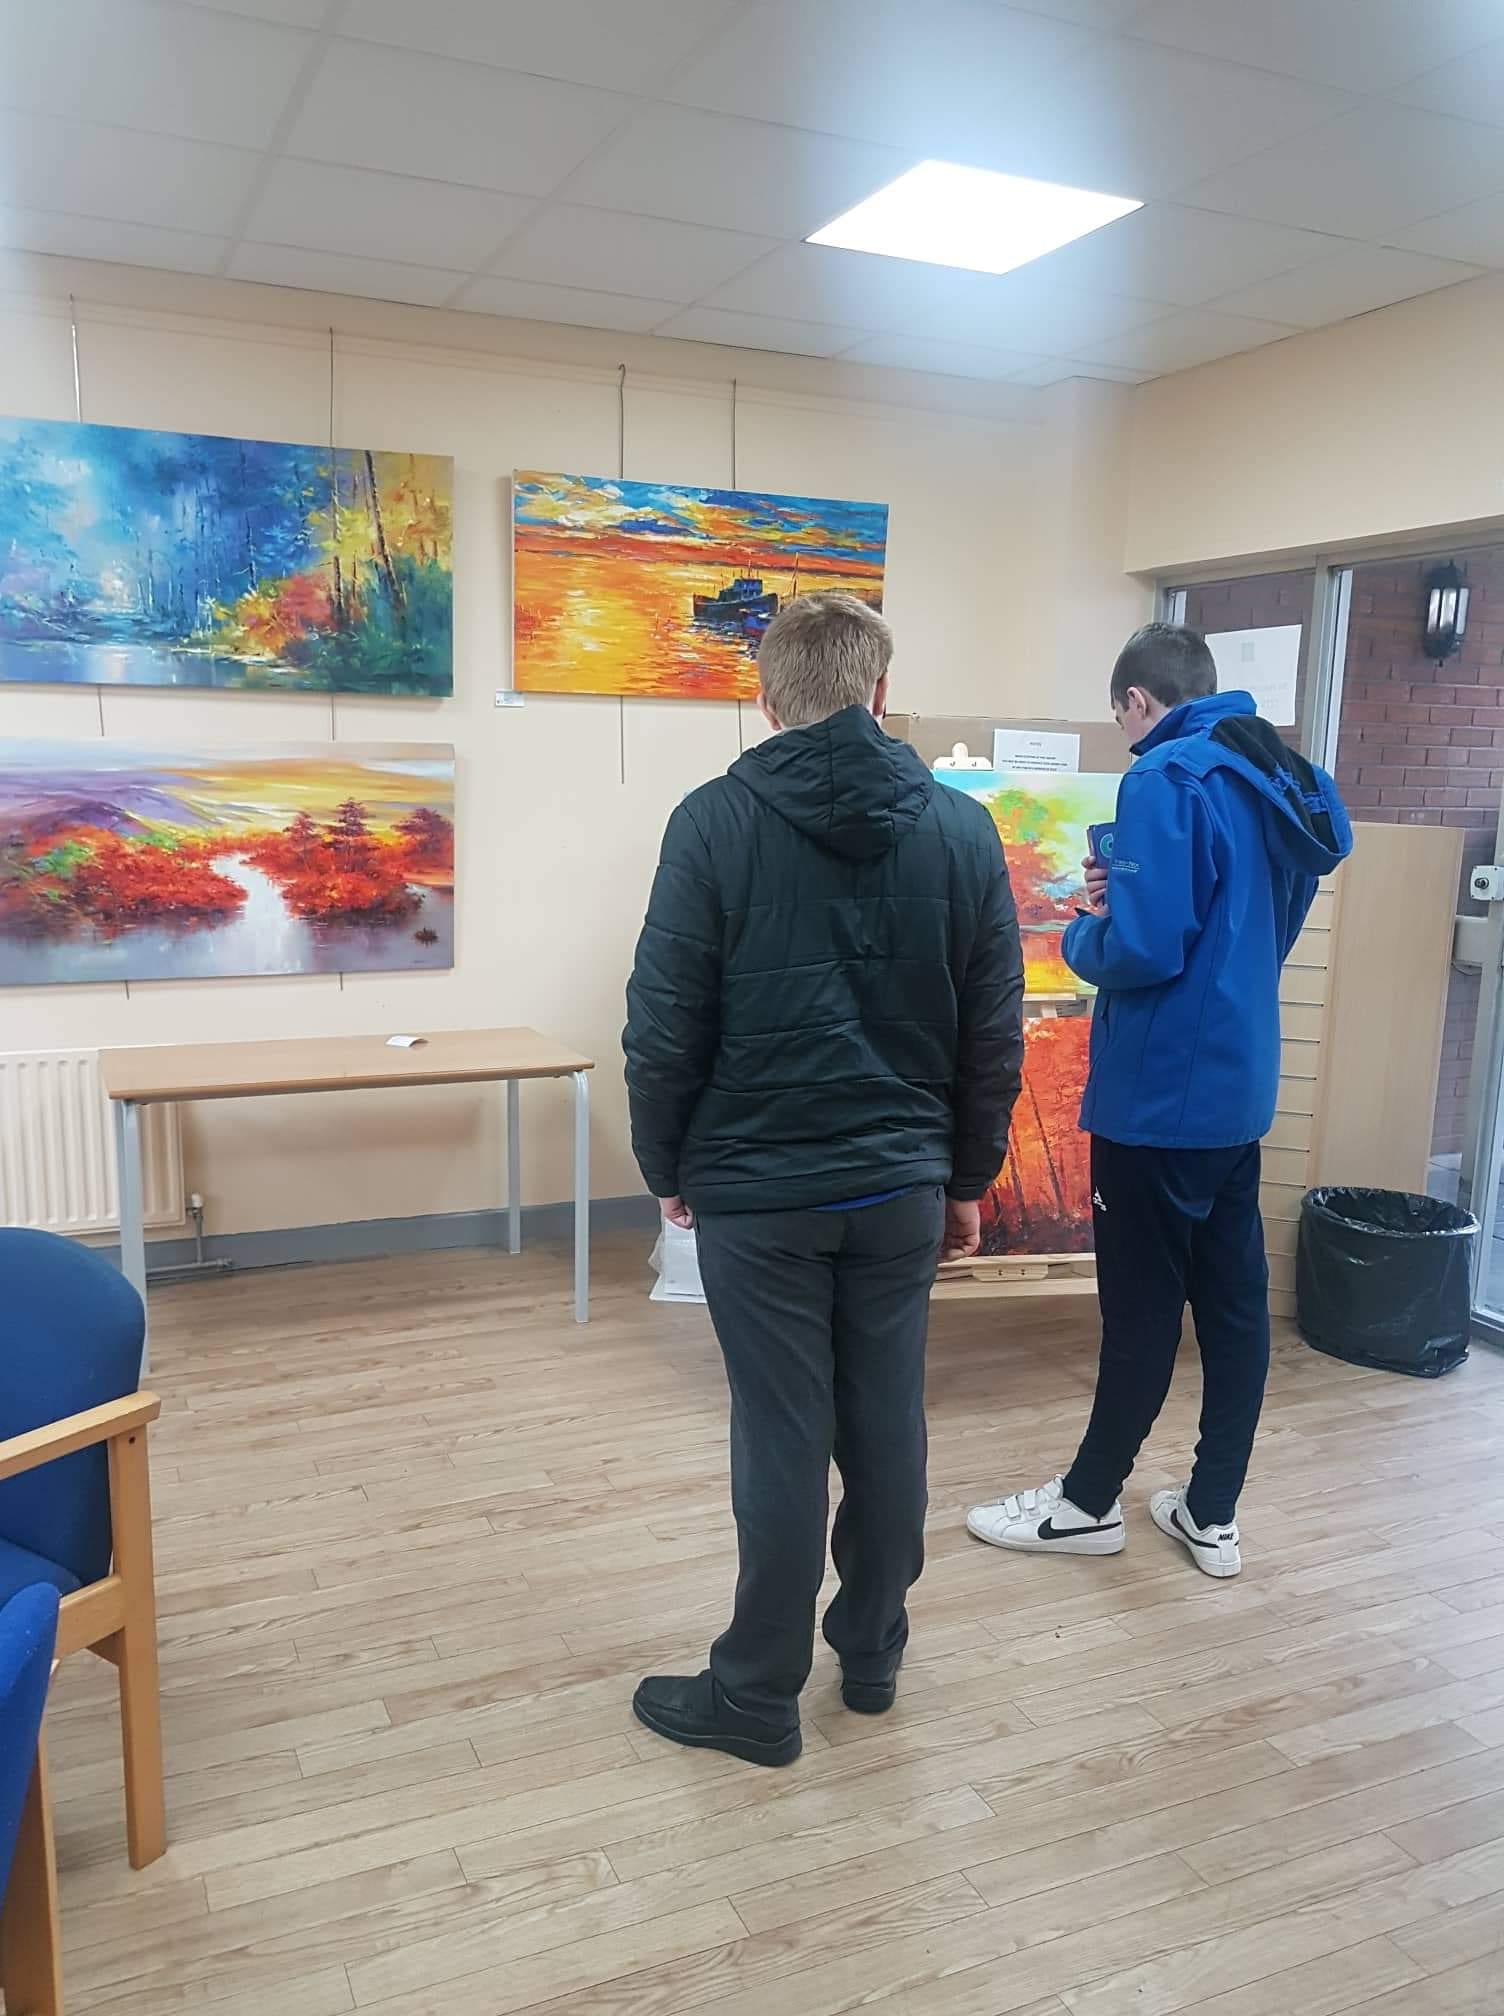 AJ Dee and Alan Wallace admiring the Art Exhibition in the local Library